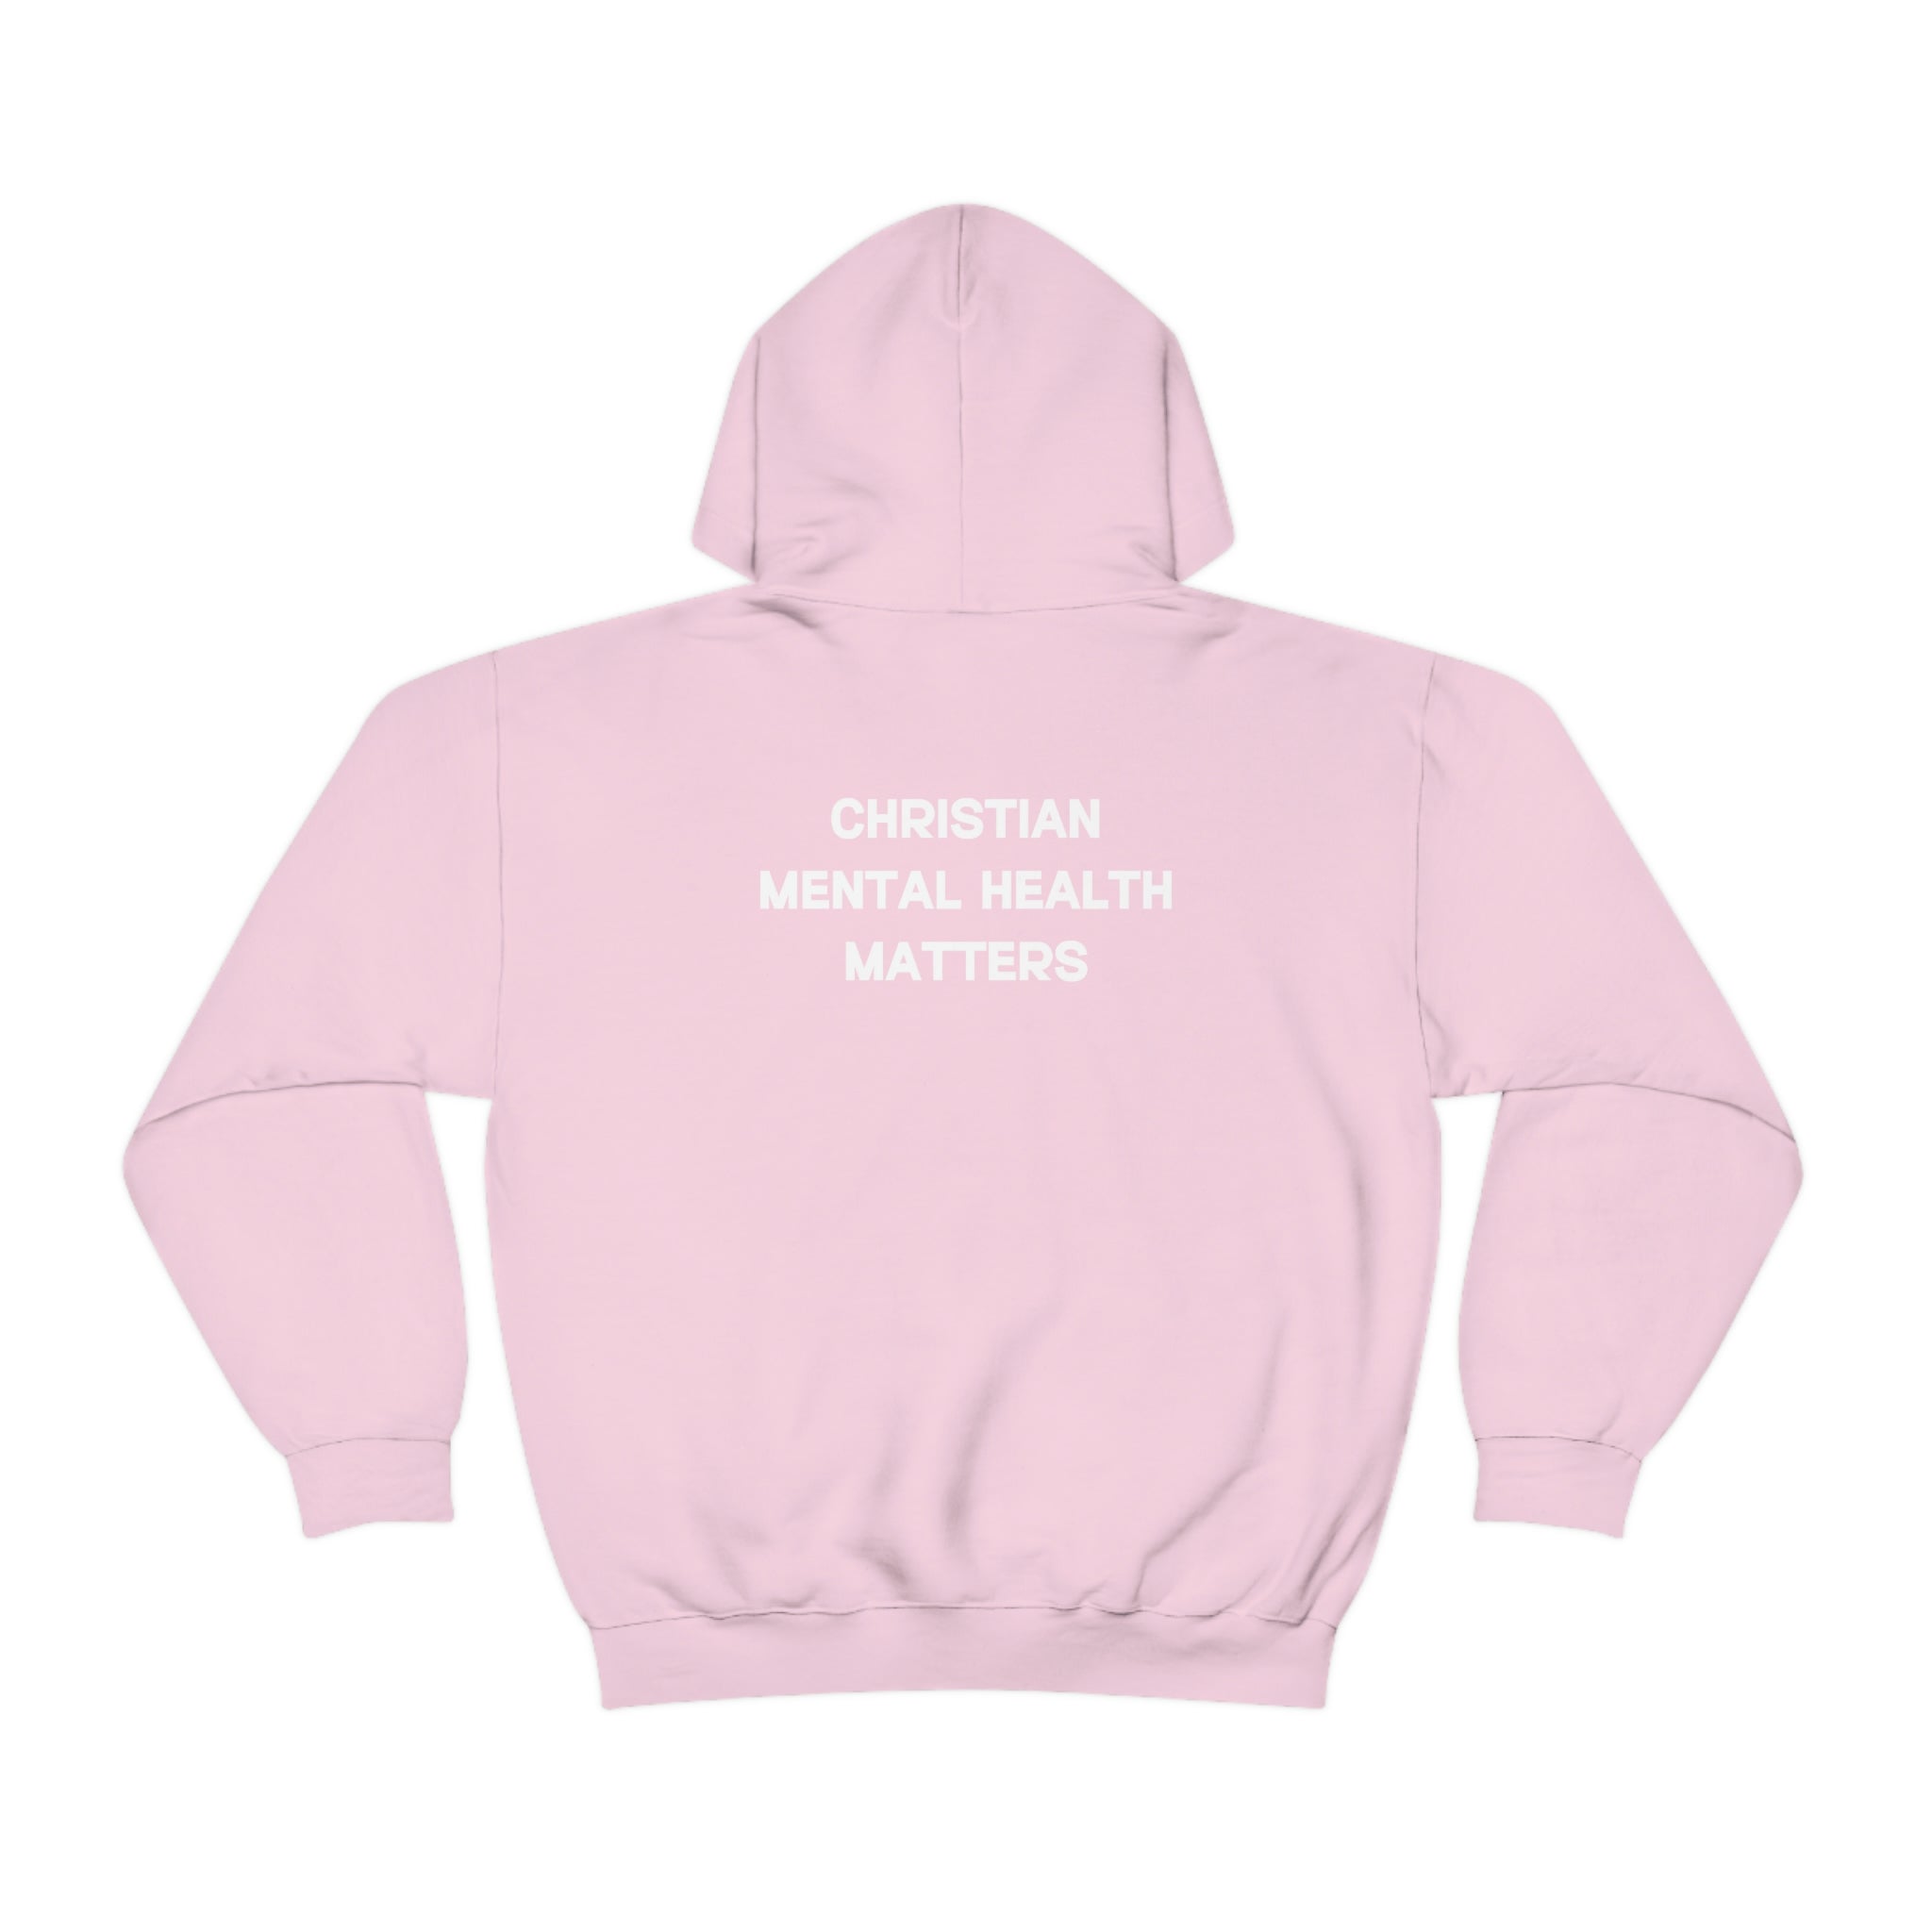 Prayers + Therapy = Healing Unisex Hoodie - Christian Mental Health Matters Collection